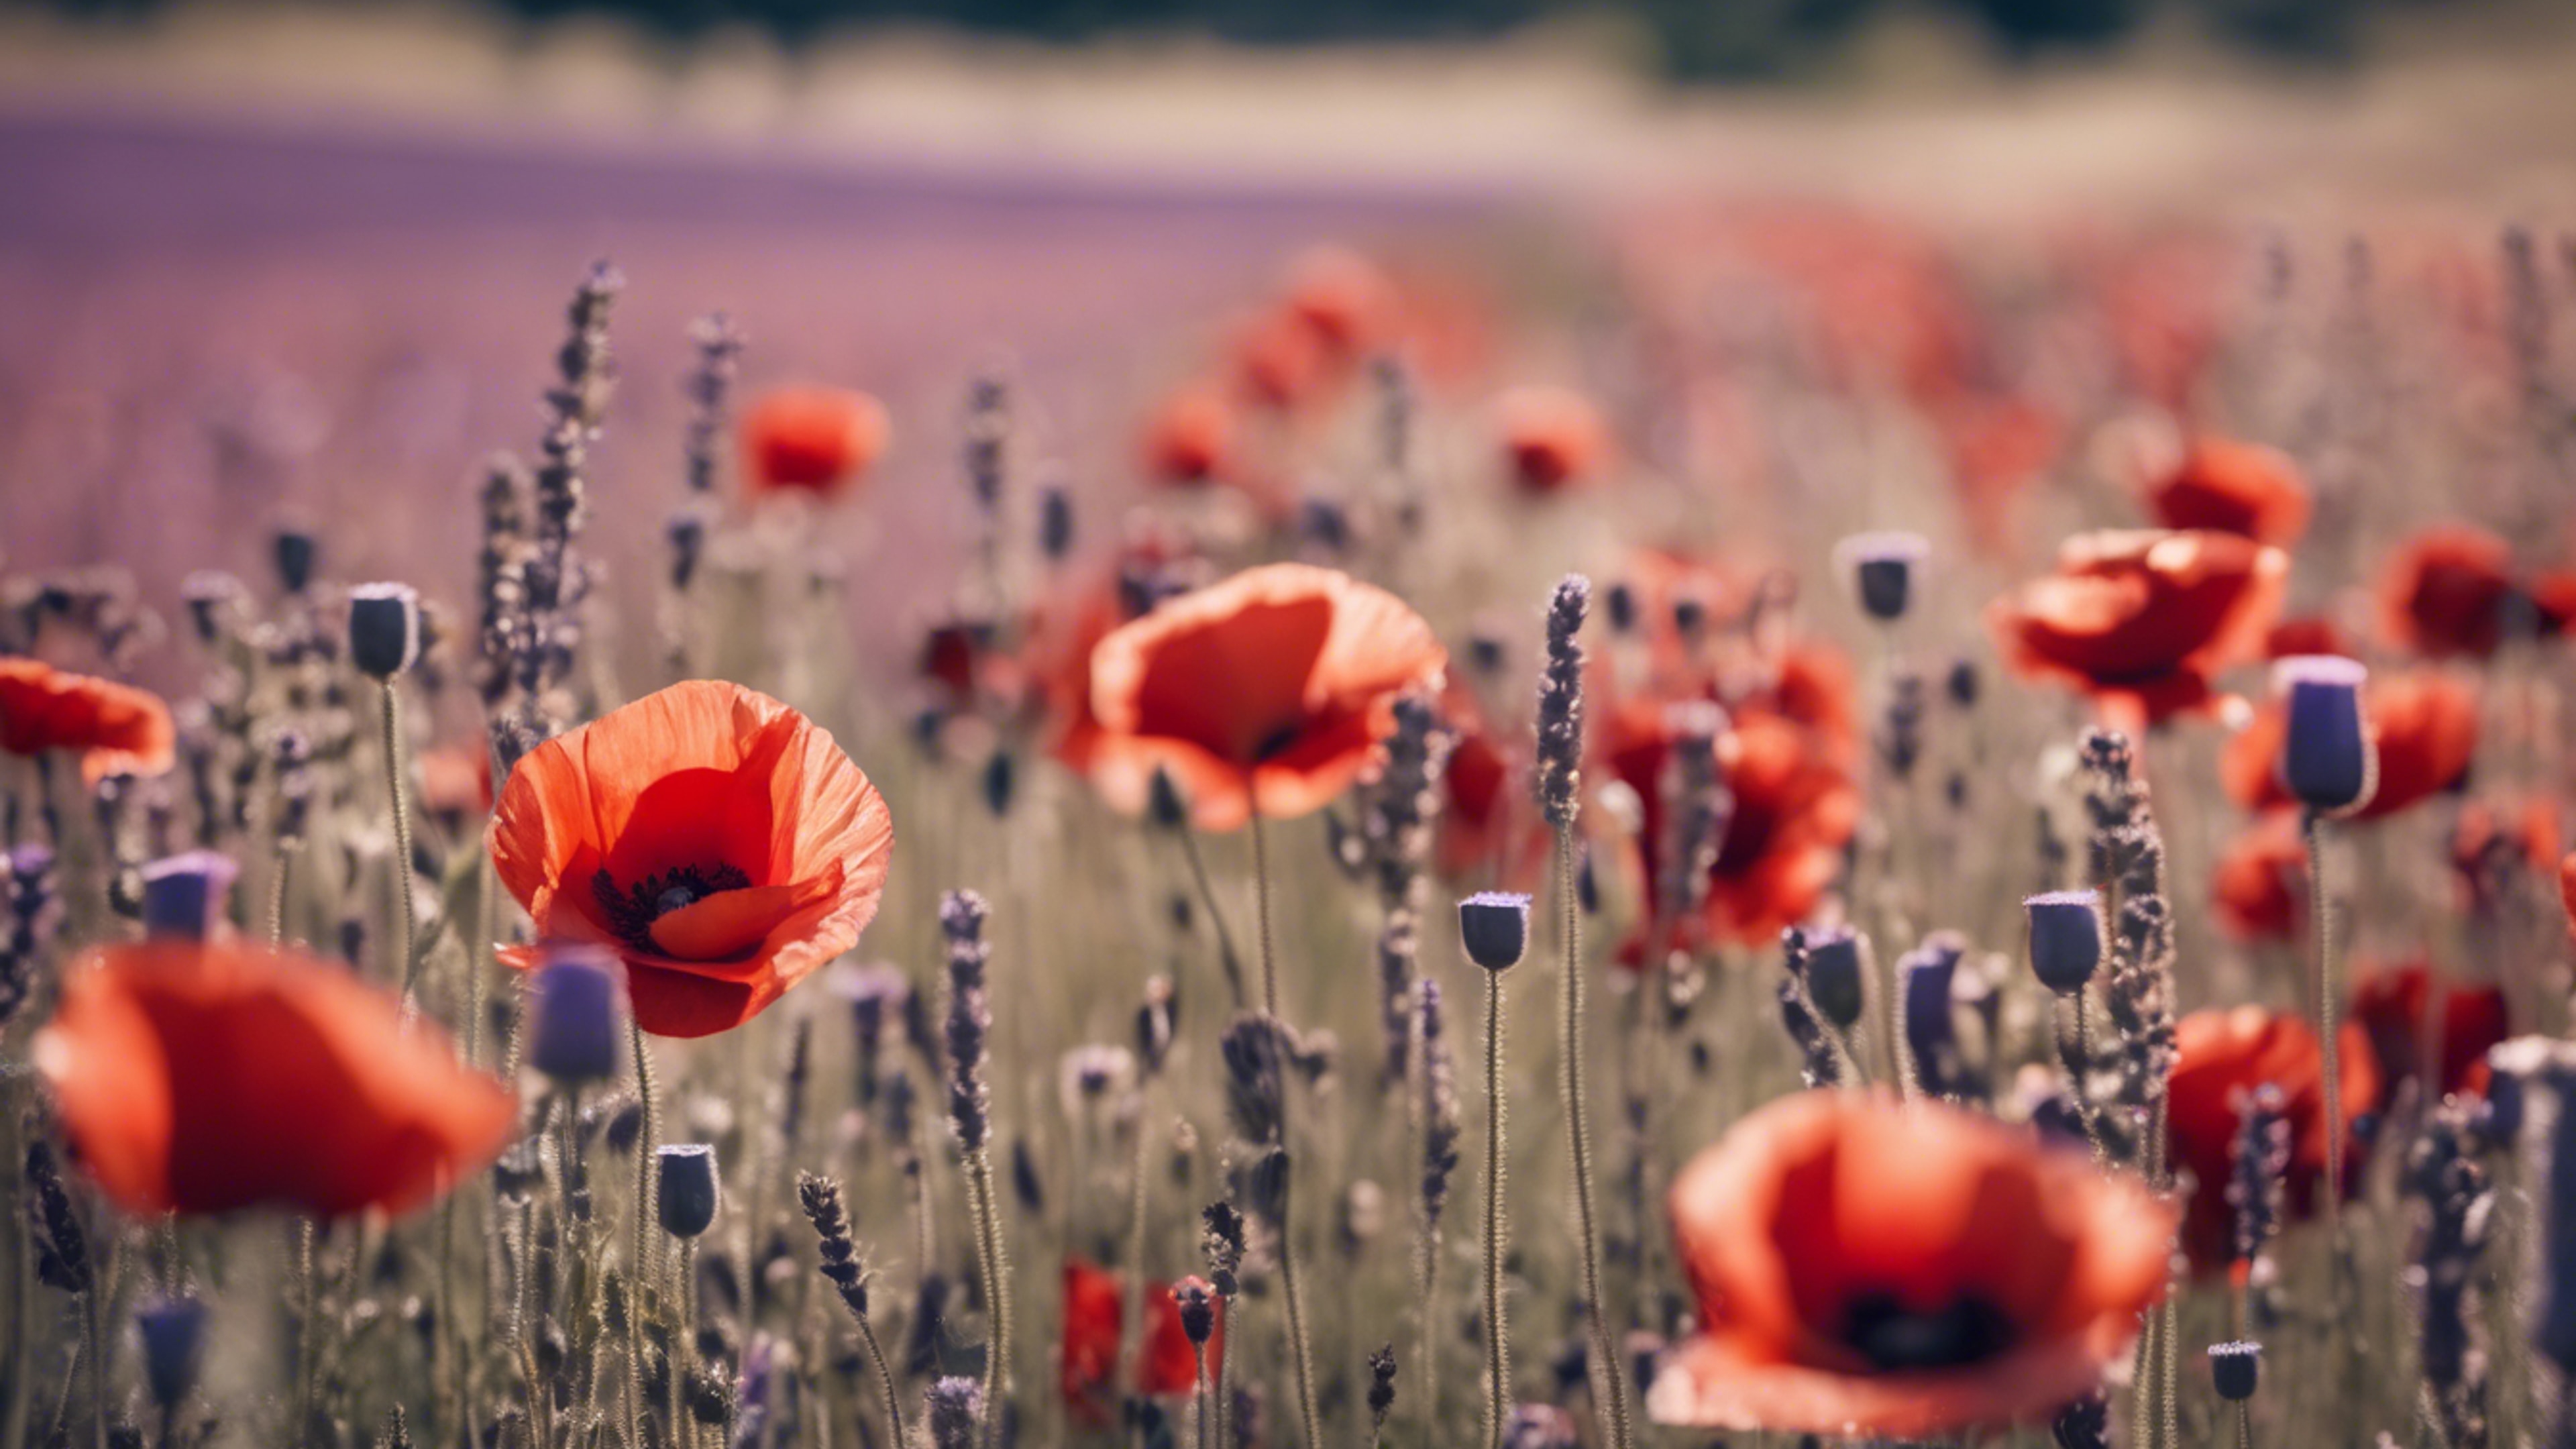 A field of red poppies naturally fading into a lavender field. Wallpaper[76e938c2507742cfb107]